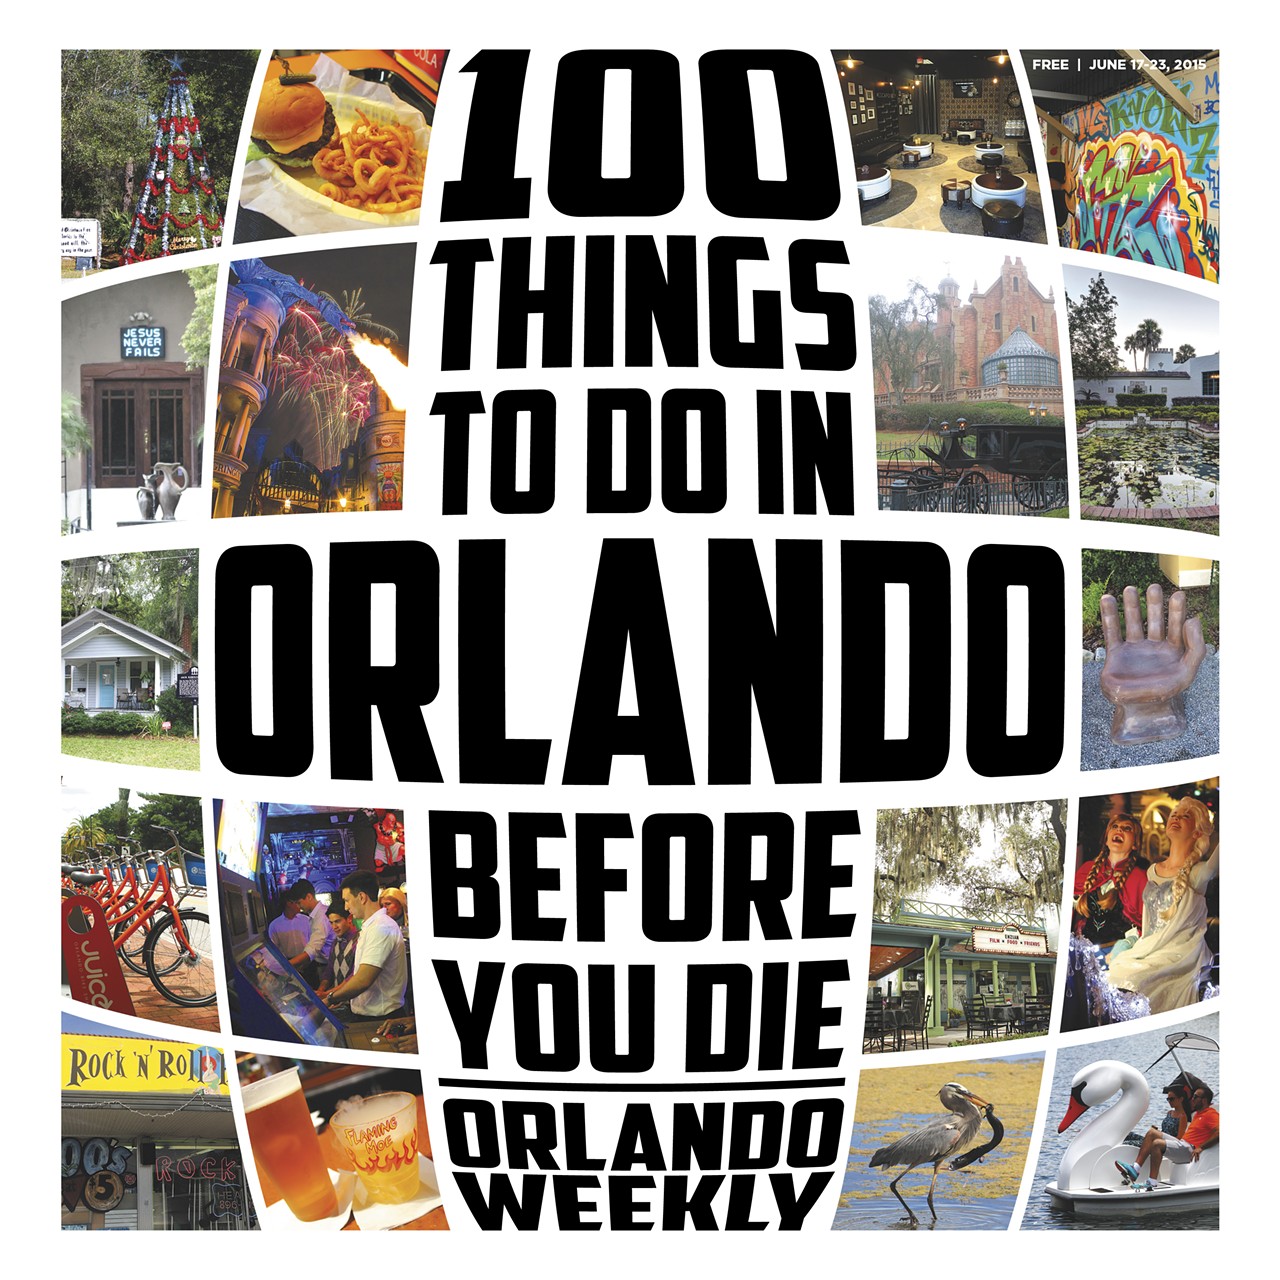 100 things you must do in Orlando before you die (2015 update!)